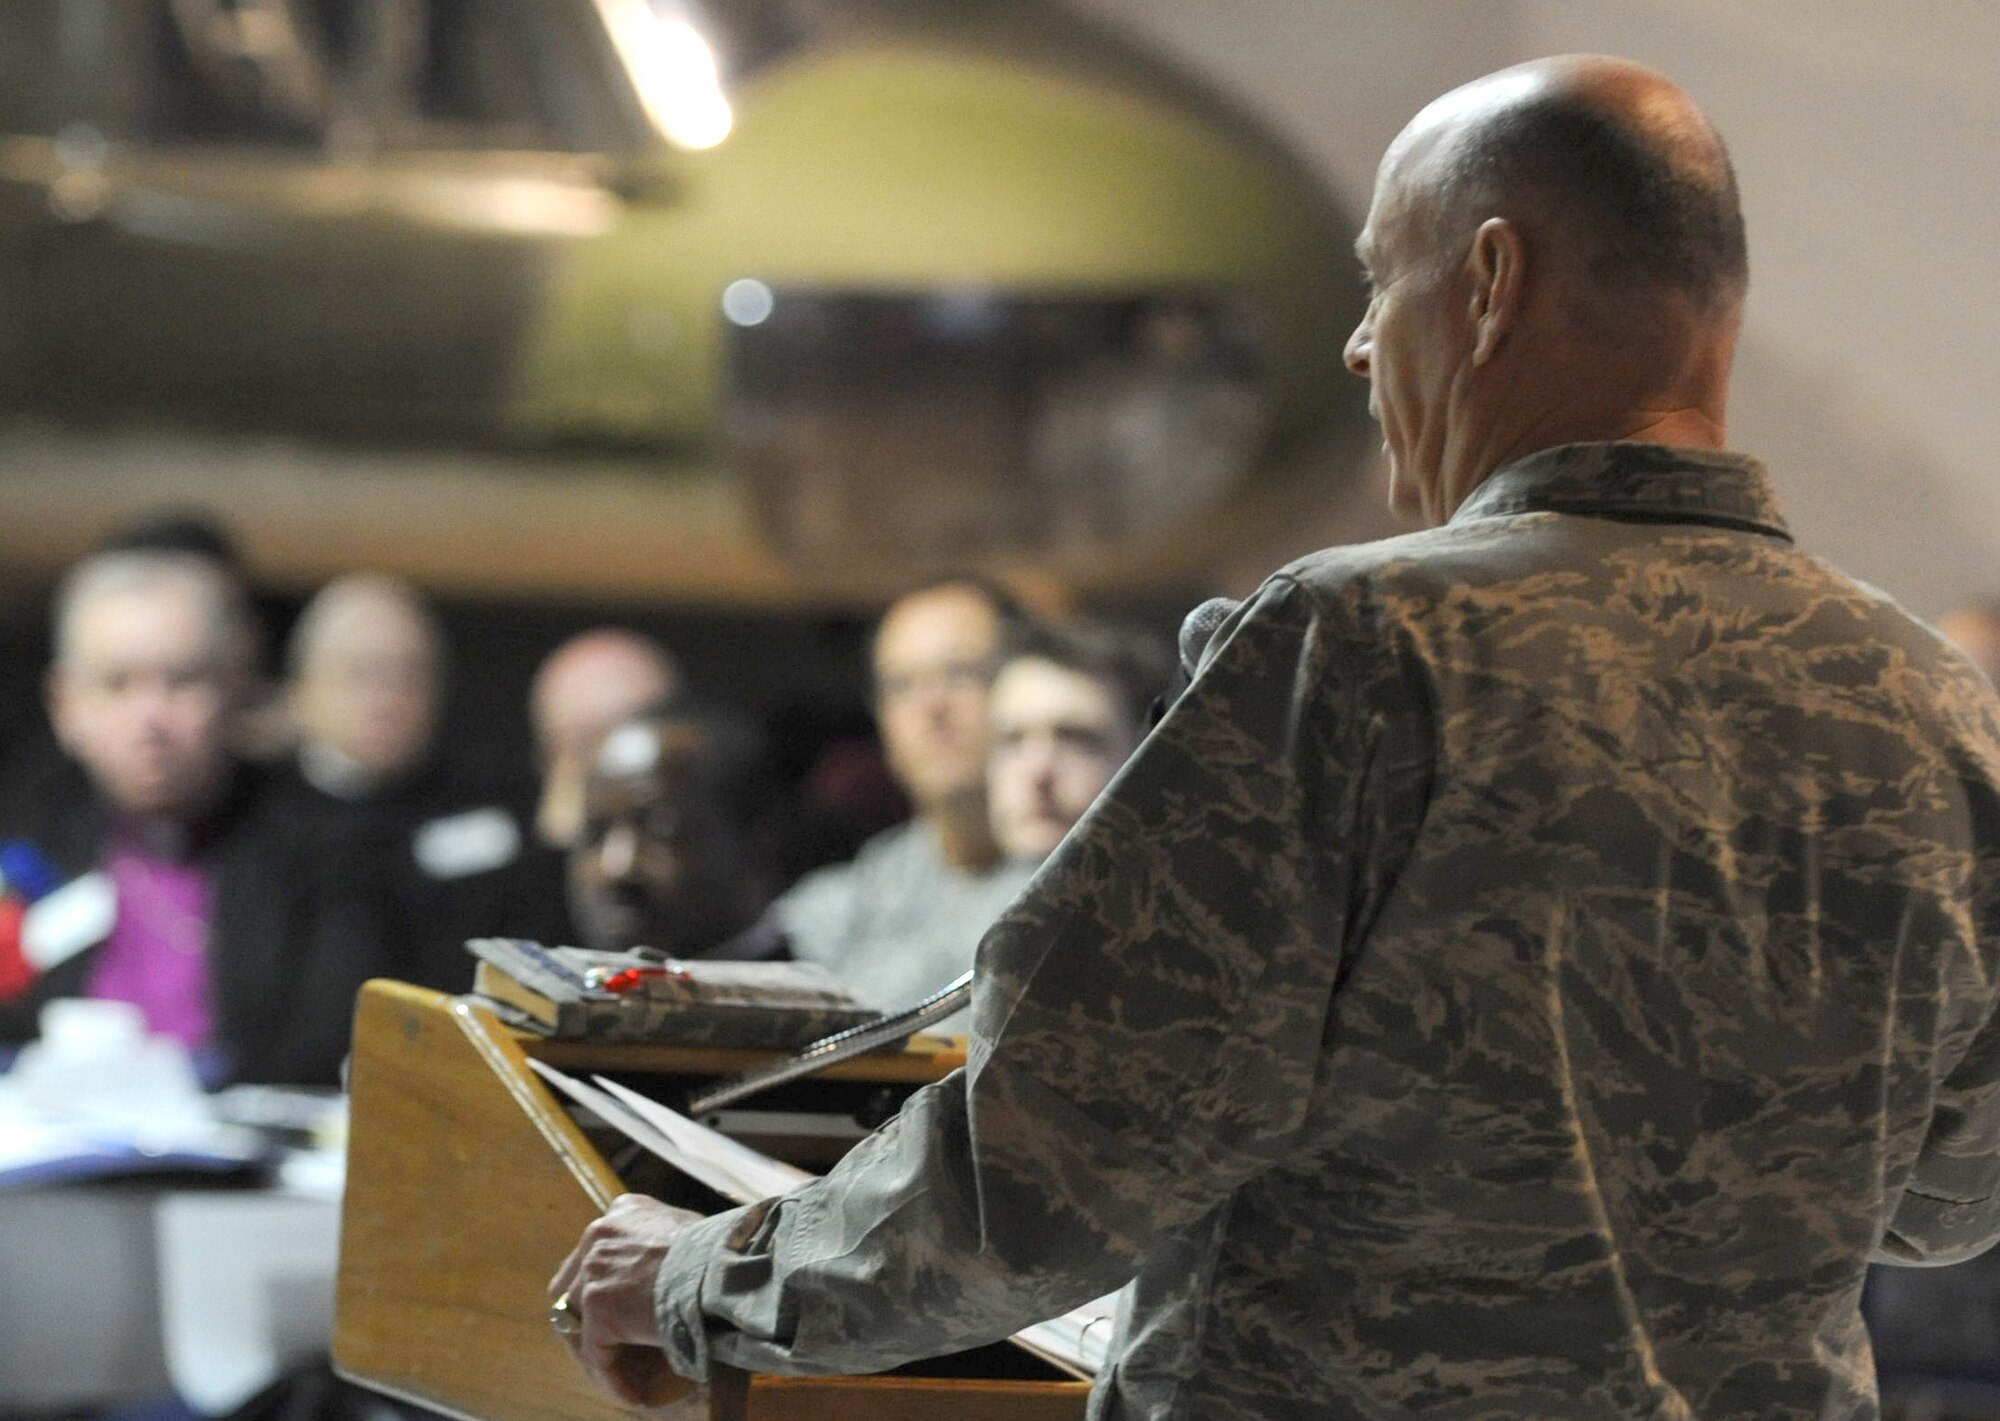 Chaplain (Col.) Jimmy Browning, Air Force Materiel Command chaplain, told the audience, “Being physically, socially, emotionally and spiritually strong is an important element of who we are – a profession of arms.” (U.S. Air Force photo by Tommie Horton)